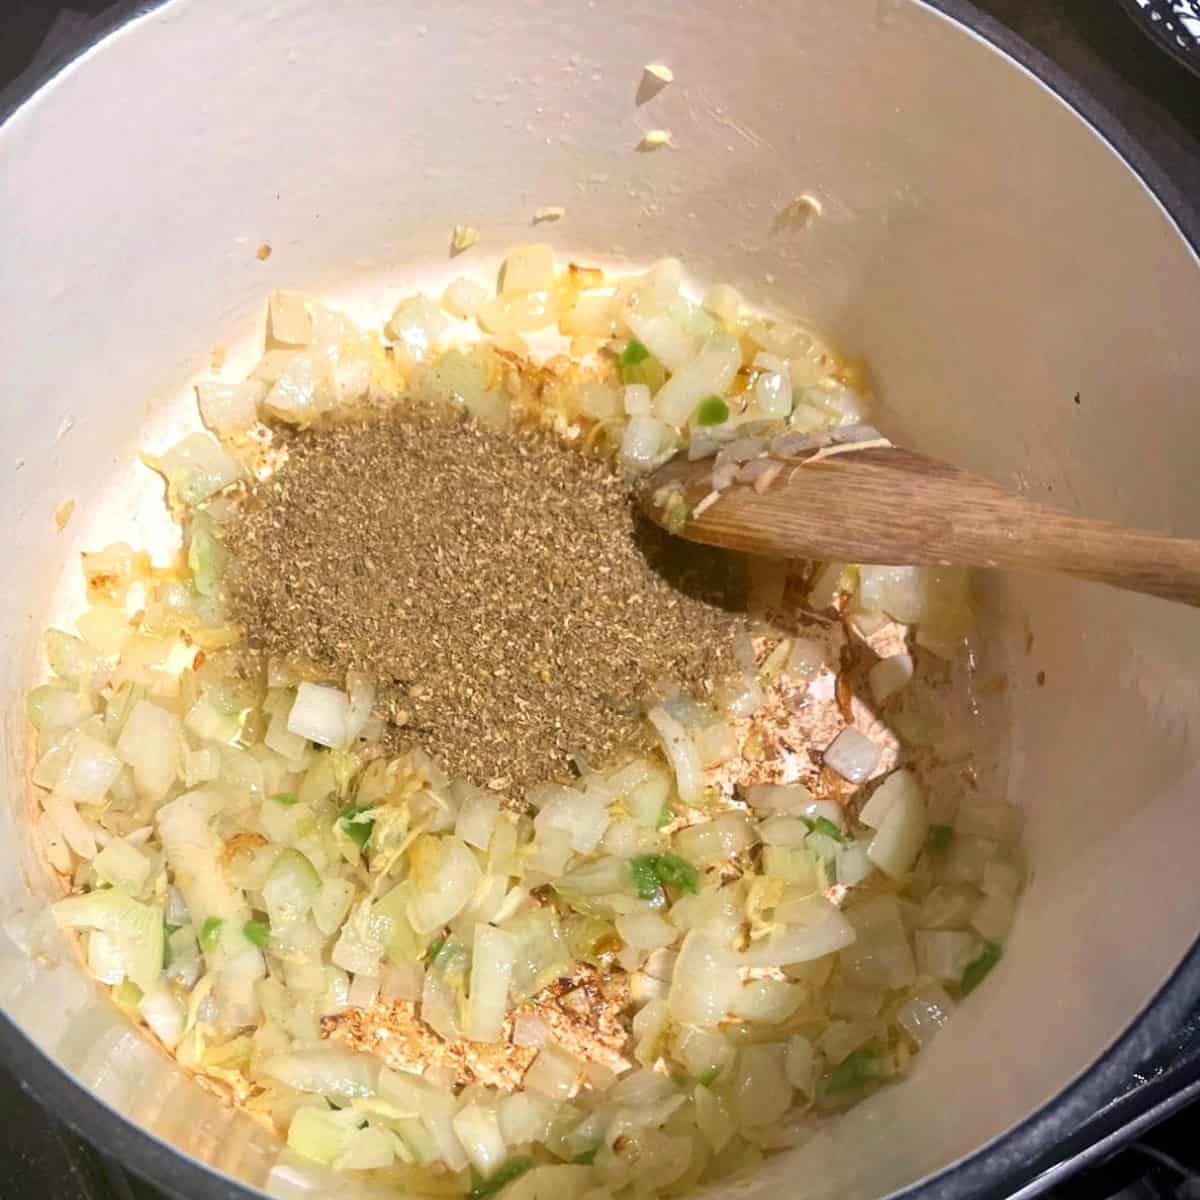 Spices added to Dutch oven with onions.